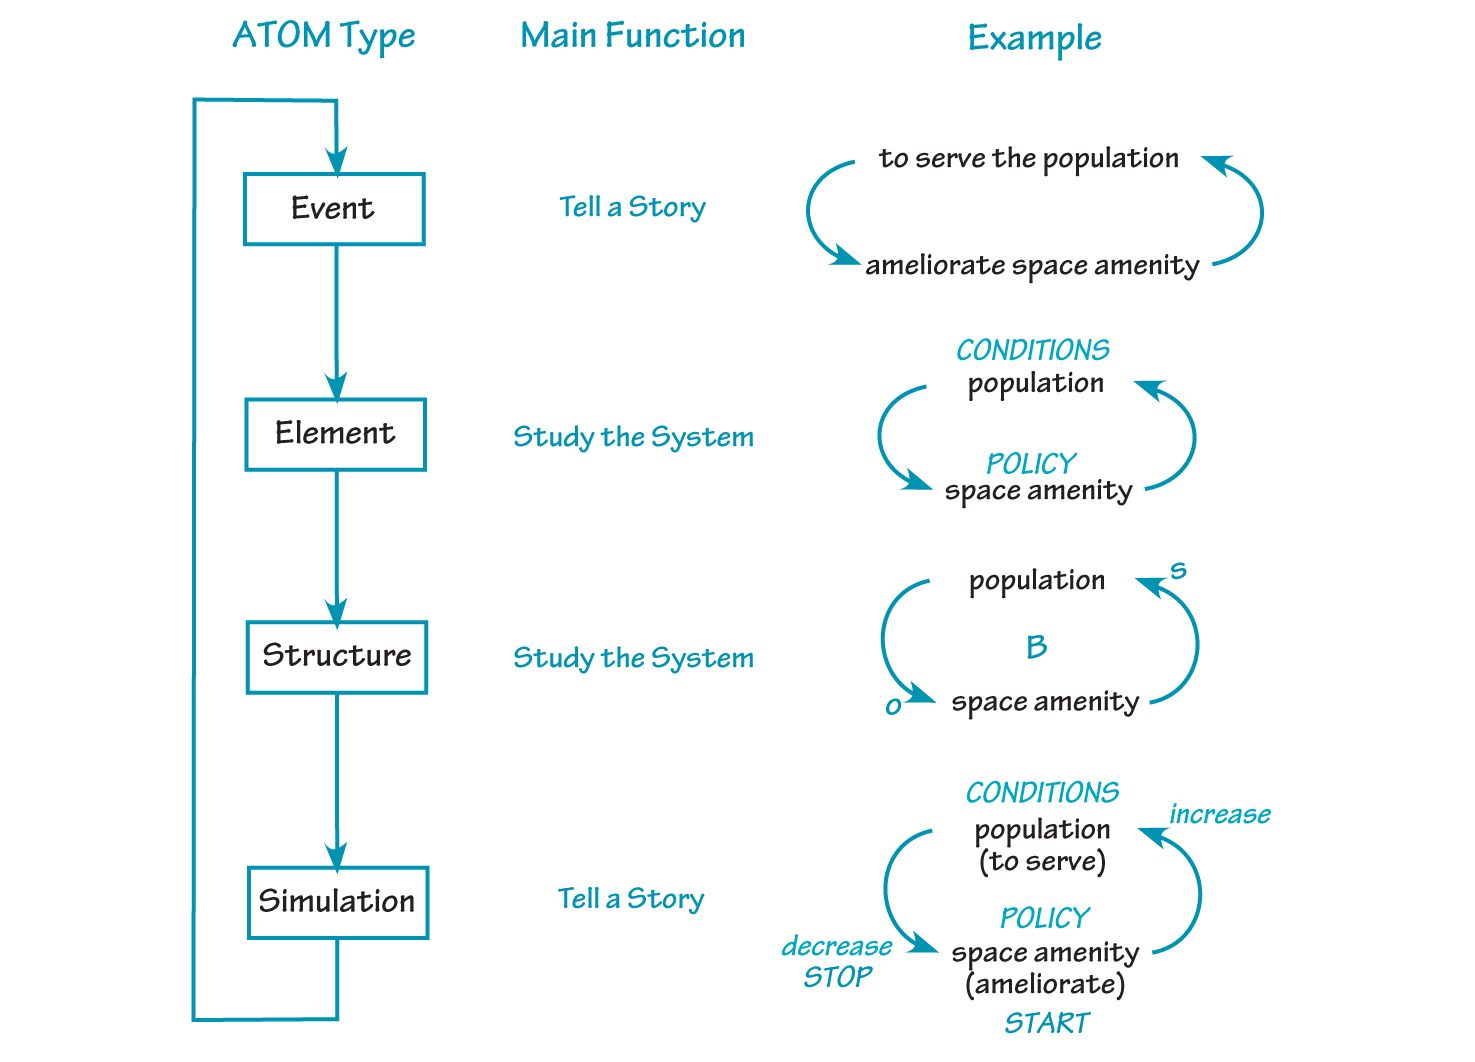 ATOM TYPES AND FUNCTIONS